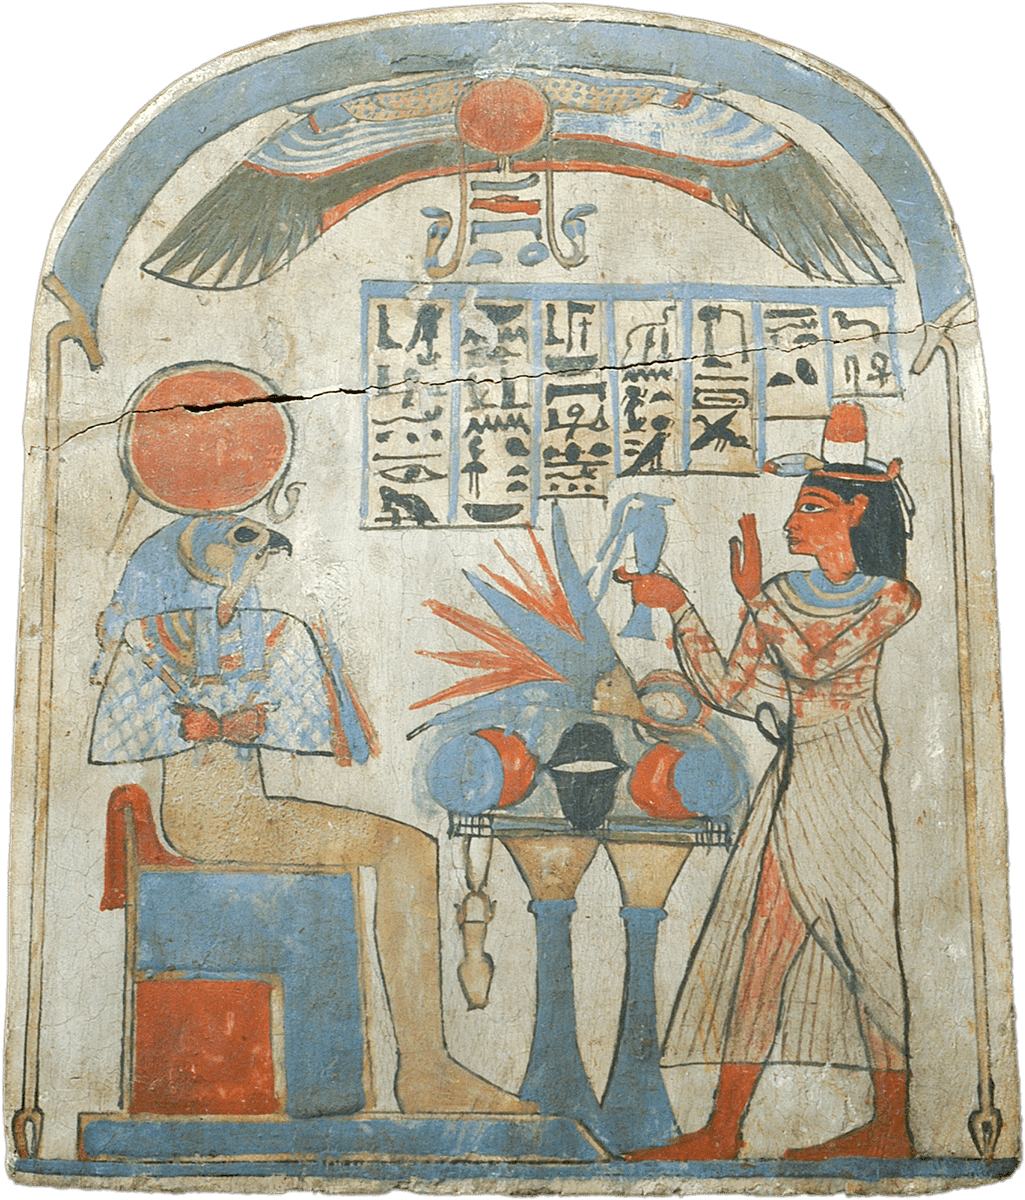 A colourful, painted stela depicting the god Osiris and a man standing either side of an offering table.